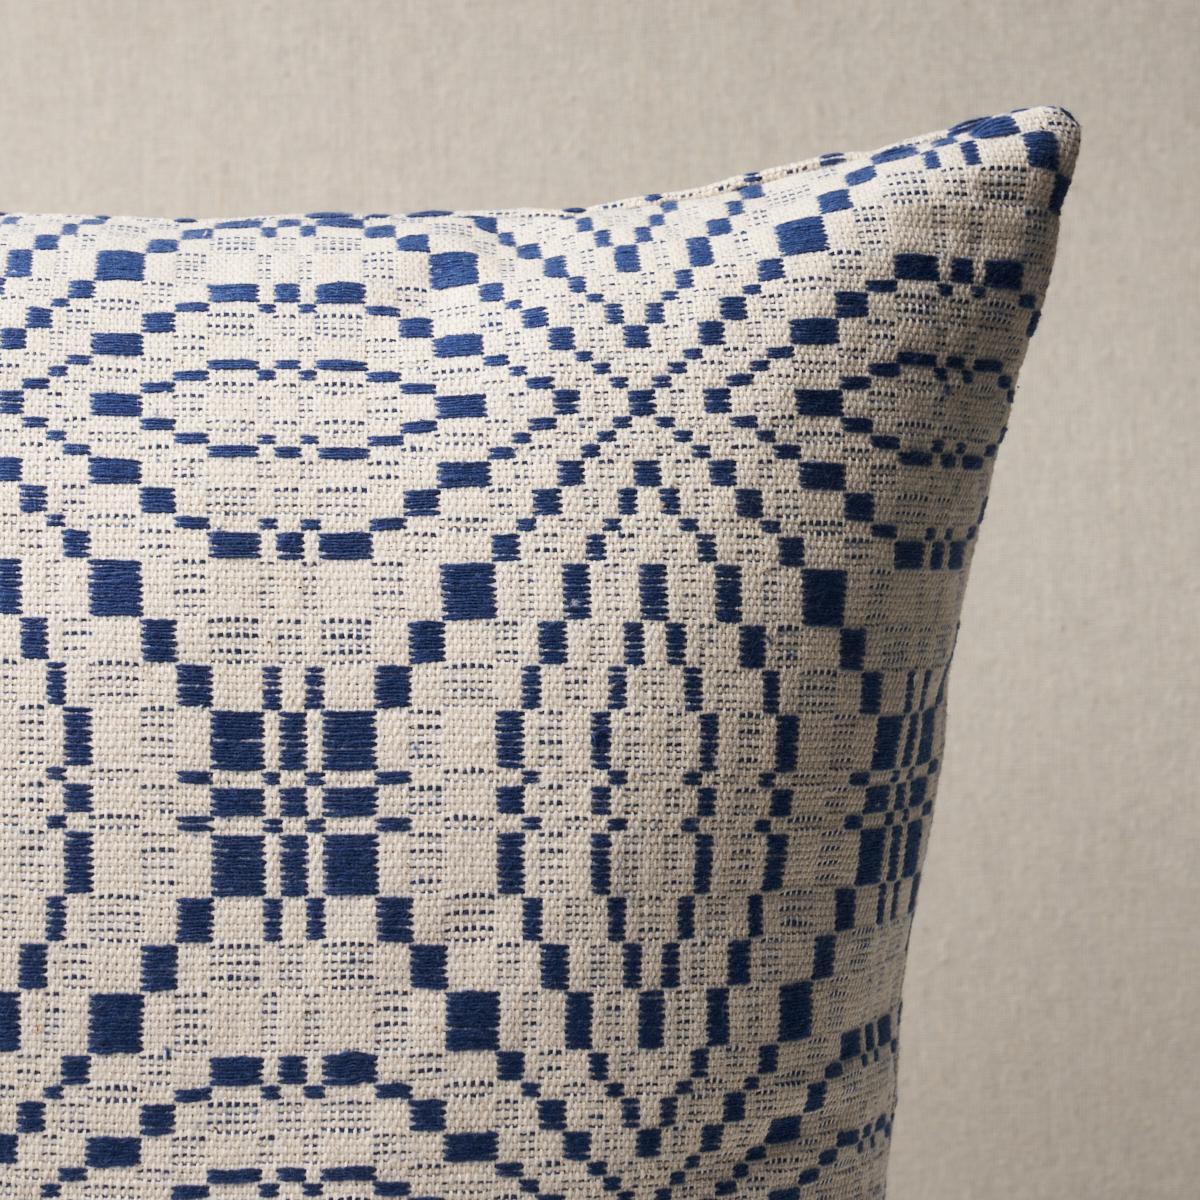 This pillow features Francestown Coverlet with a knife edge finish. Woven on a traditional handloom, Francetown Coverlet in navy features a popular 18th-century geometric motif that works beautifully in modern-day interiors. Pillow includes a